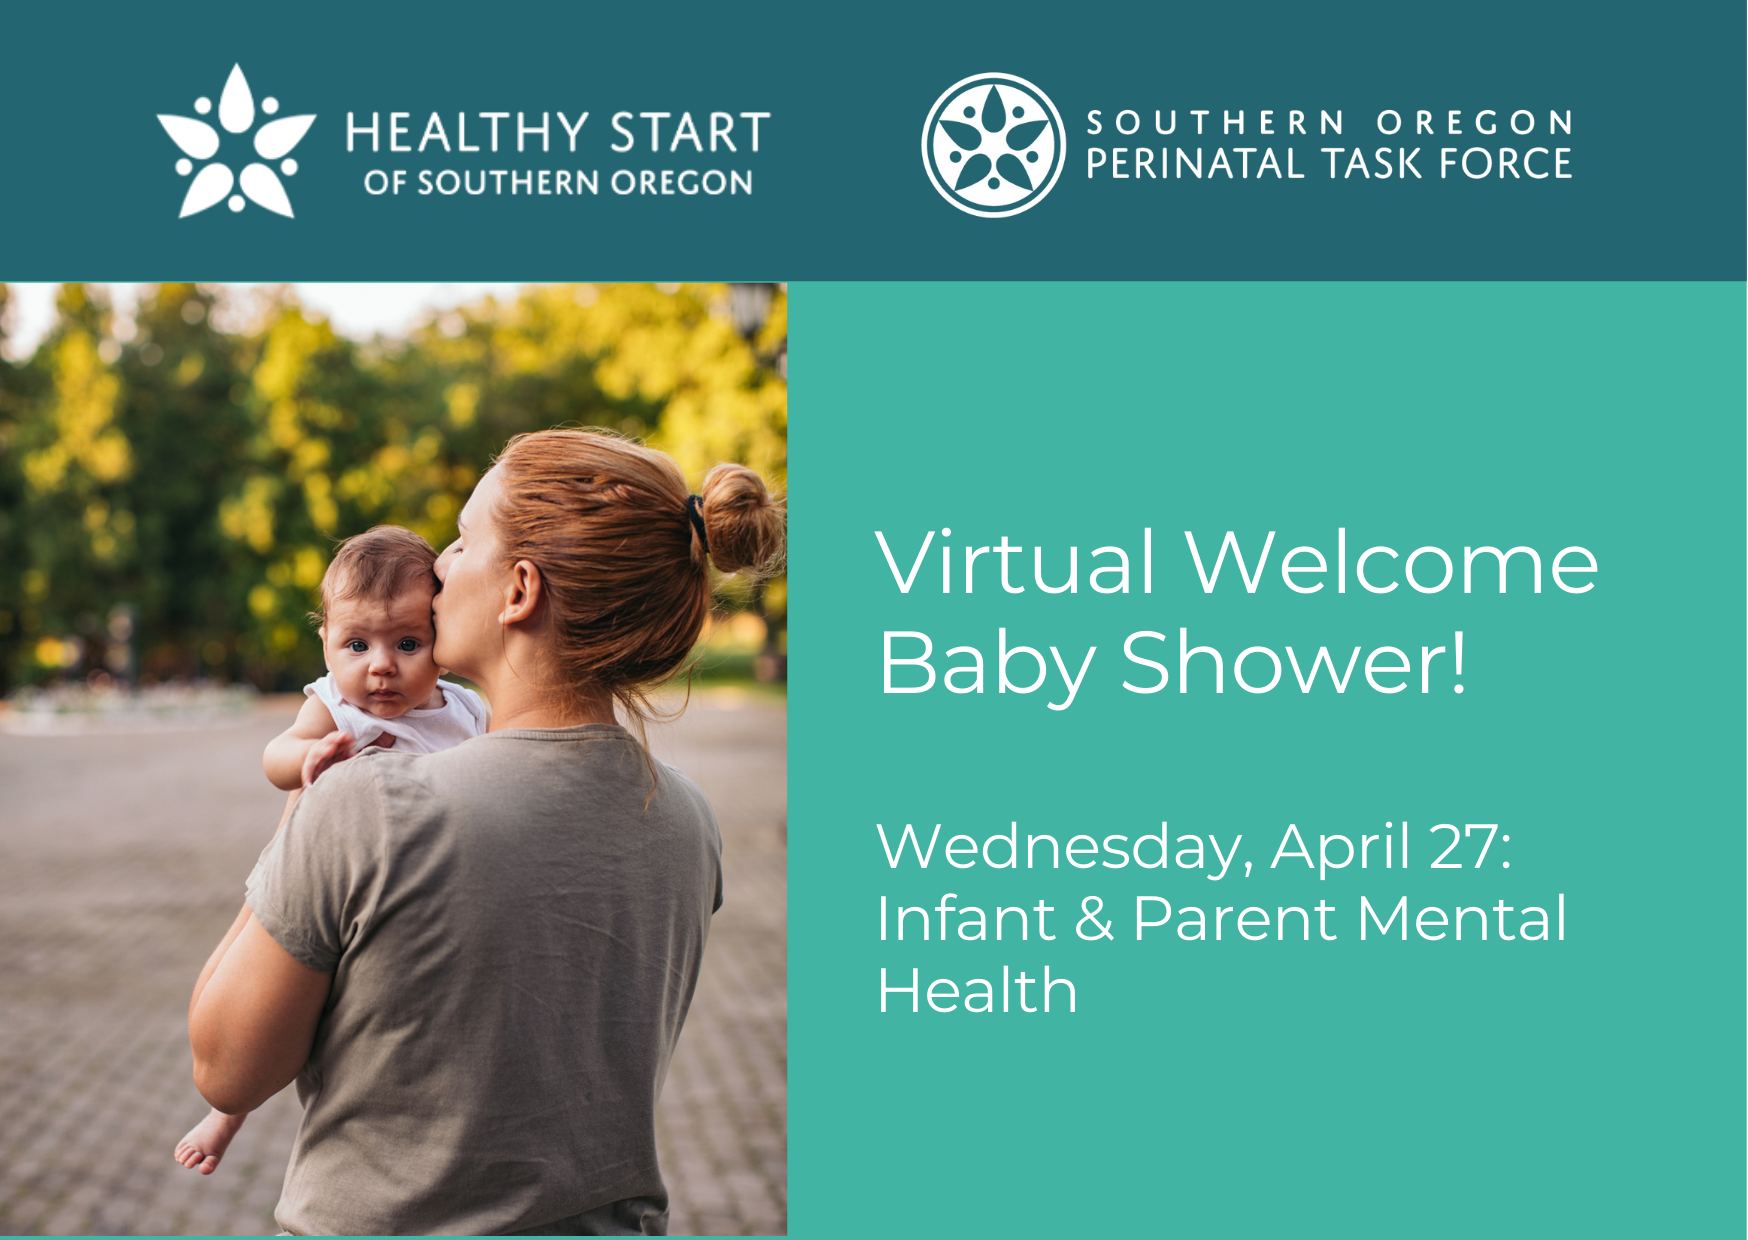 Welcome Baby Shower: Wednesday April 27, 2022 - Infant & Parent Mental Health